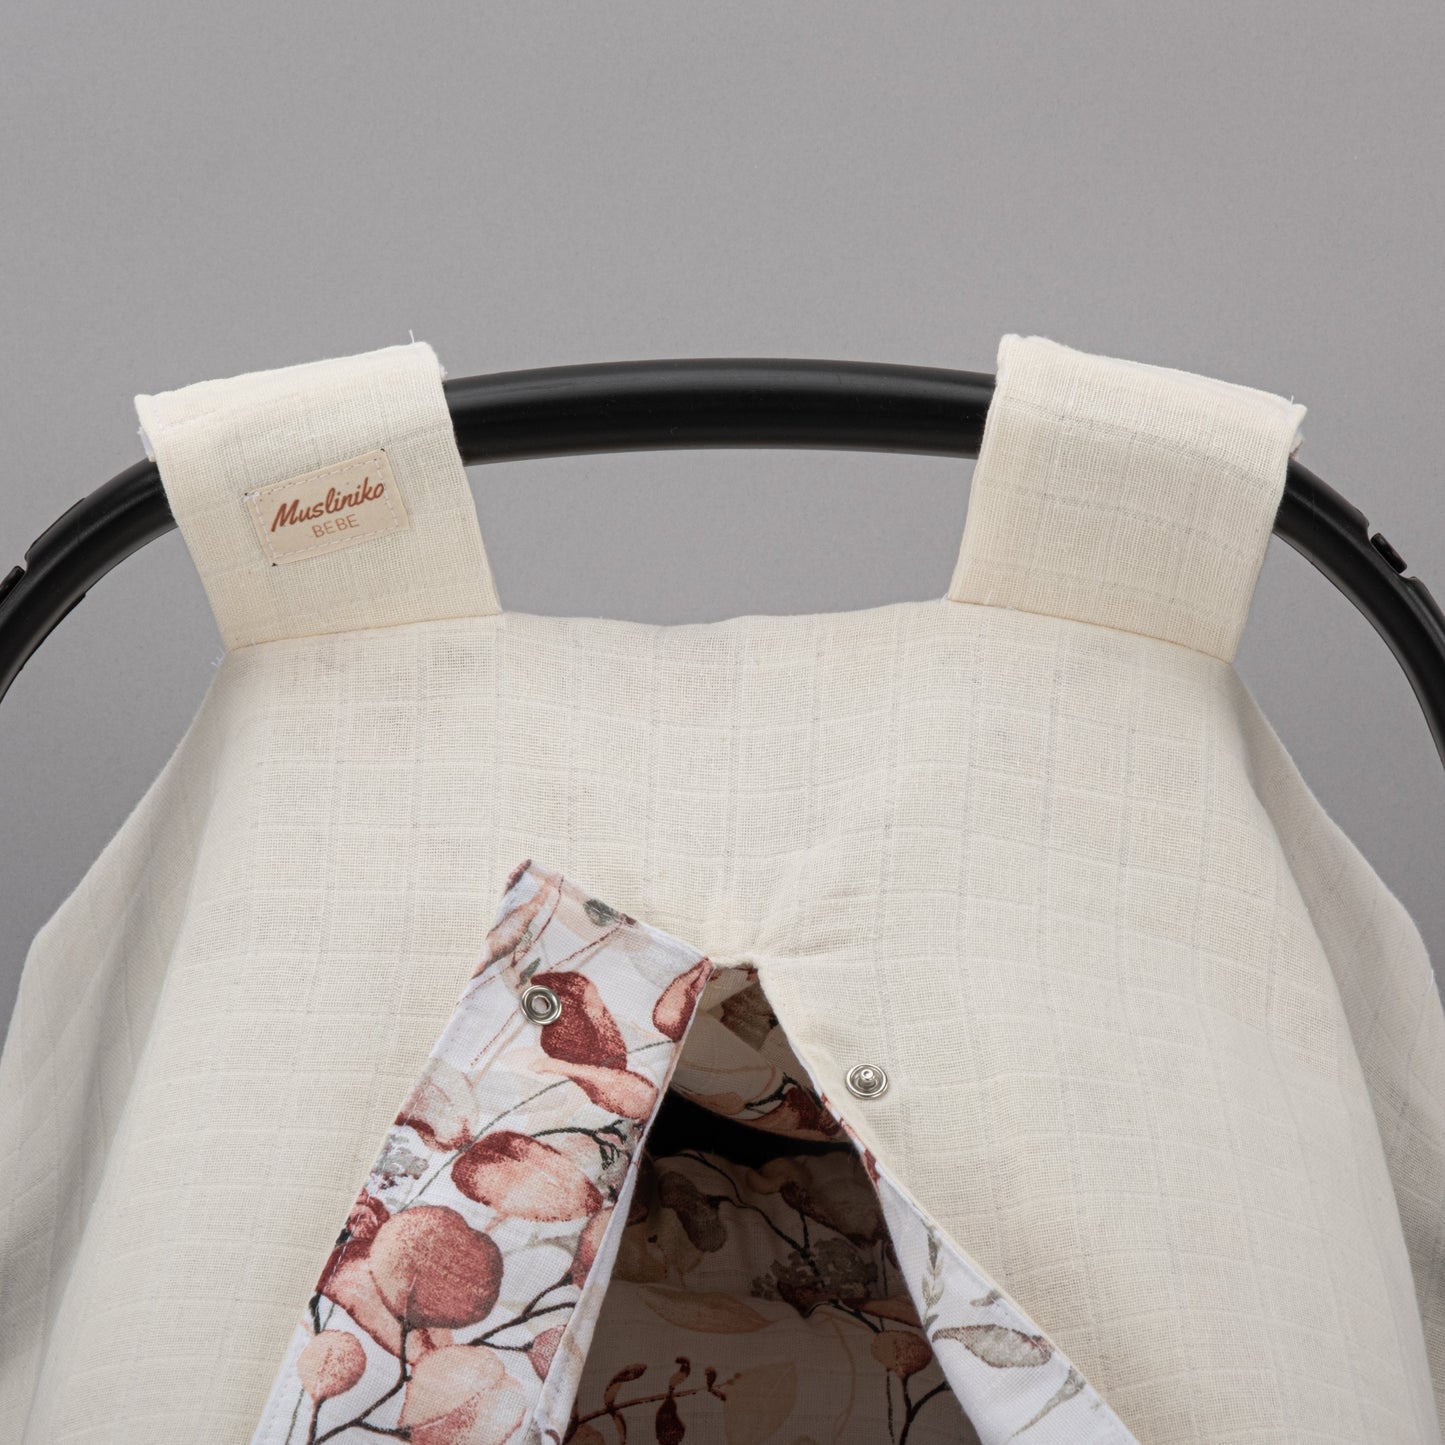 Stroller Cover Set - Double Side - Cream Muslin - Autumn Leaves